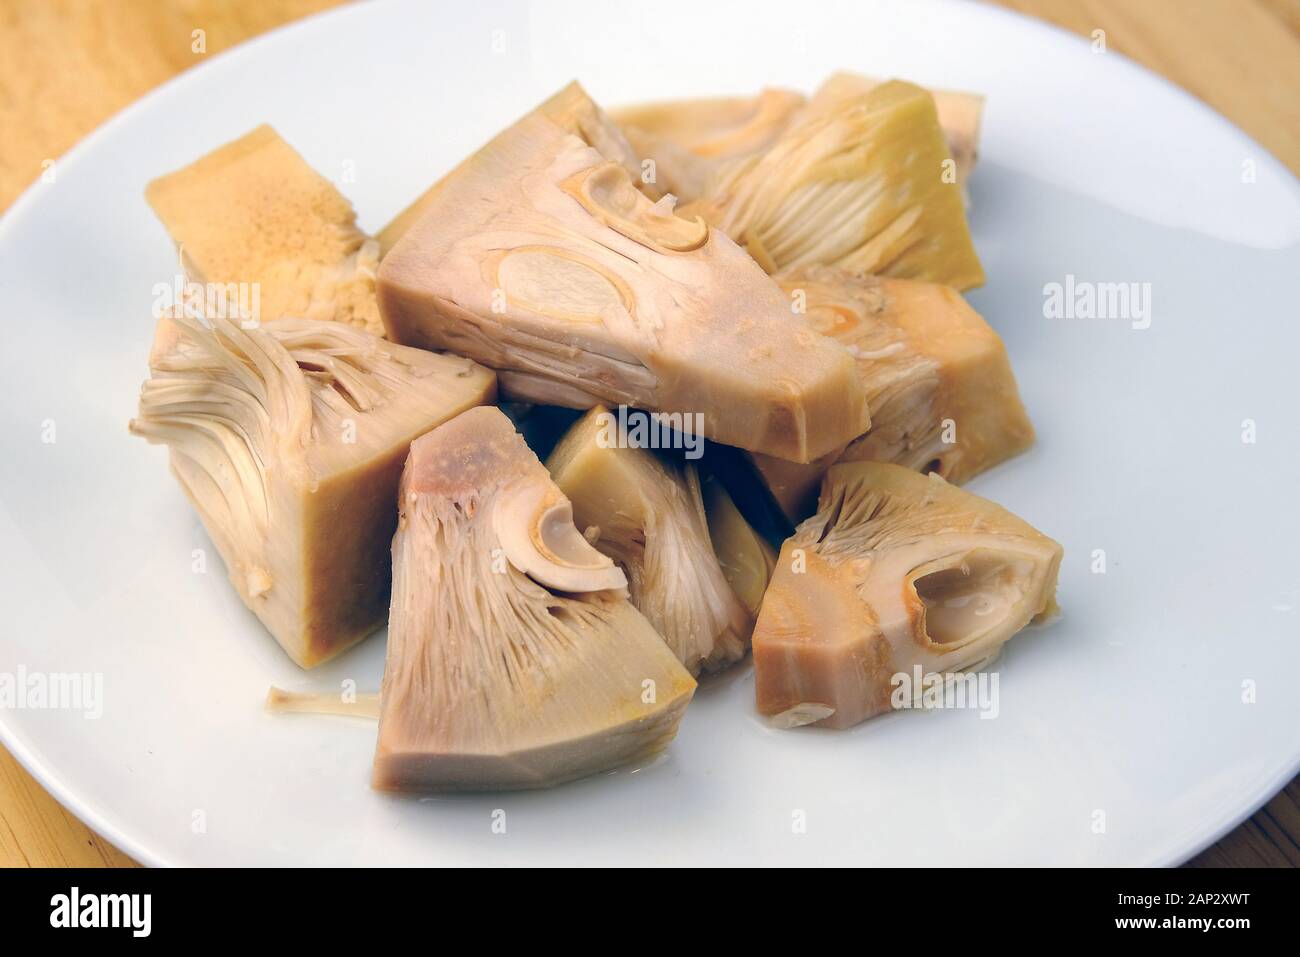 Canned Jackfruit young tender pieces on the plate. Healthy vegan meat replacement and it's one of the food trends due to it's meat like texture. Stock Photo